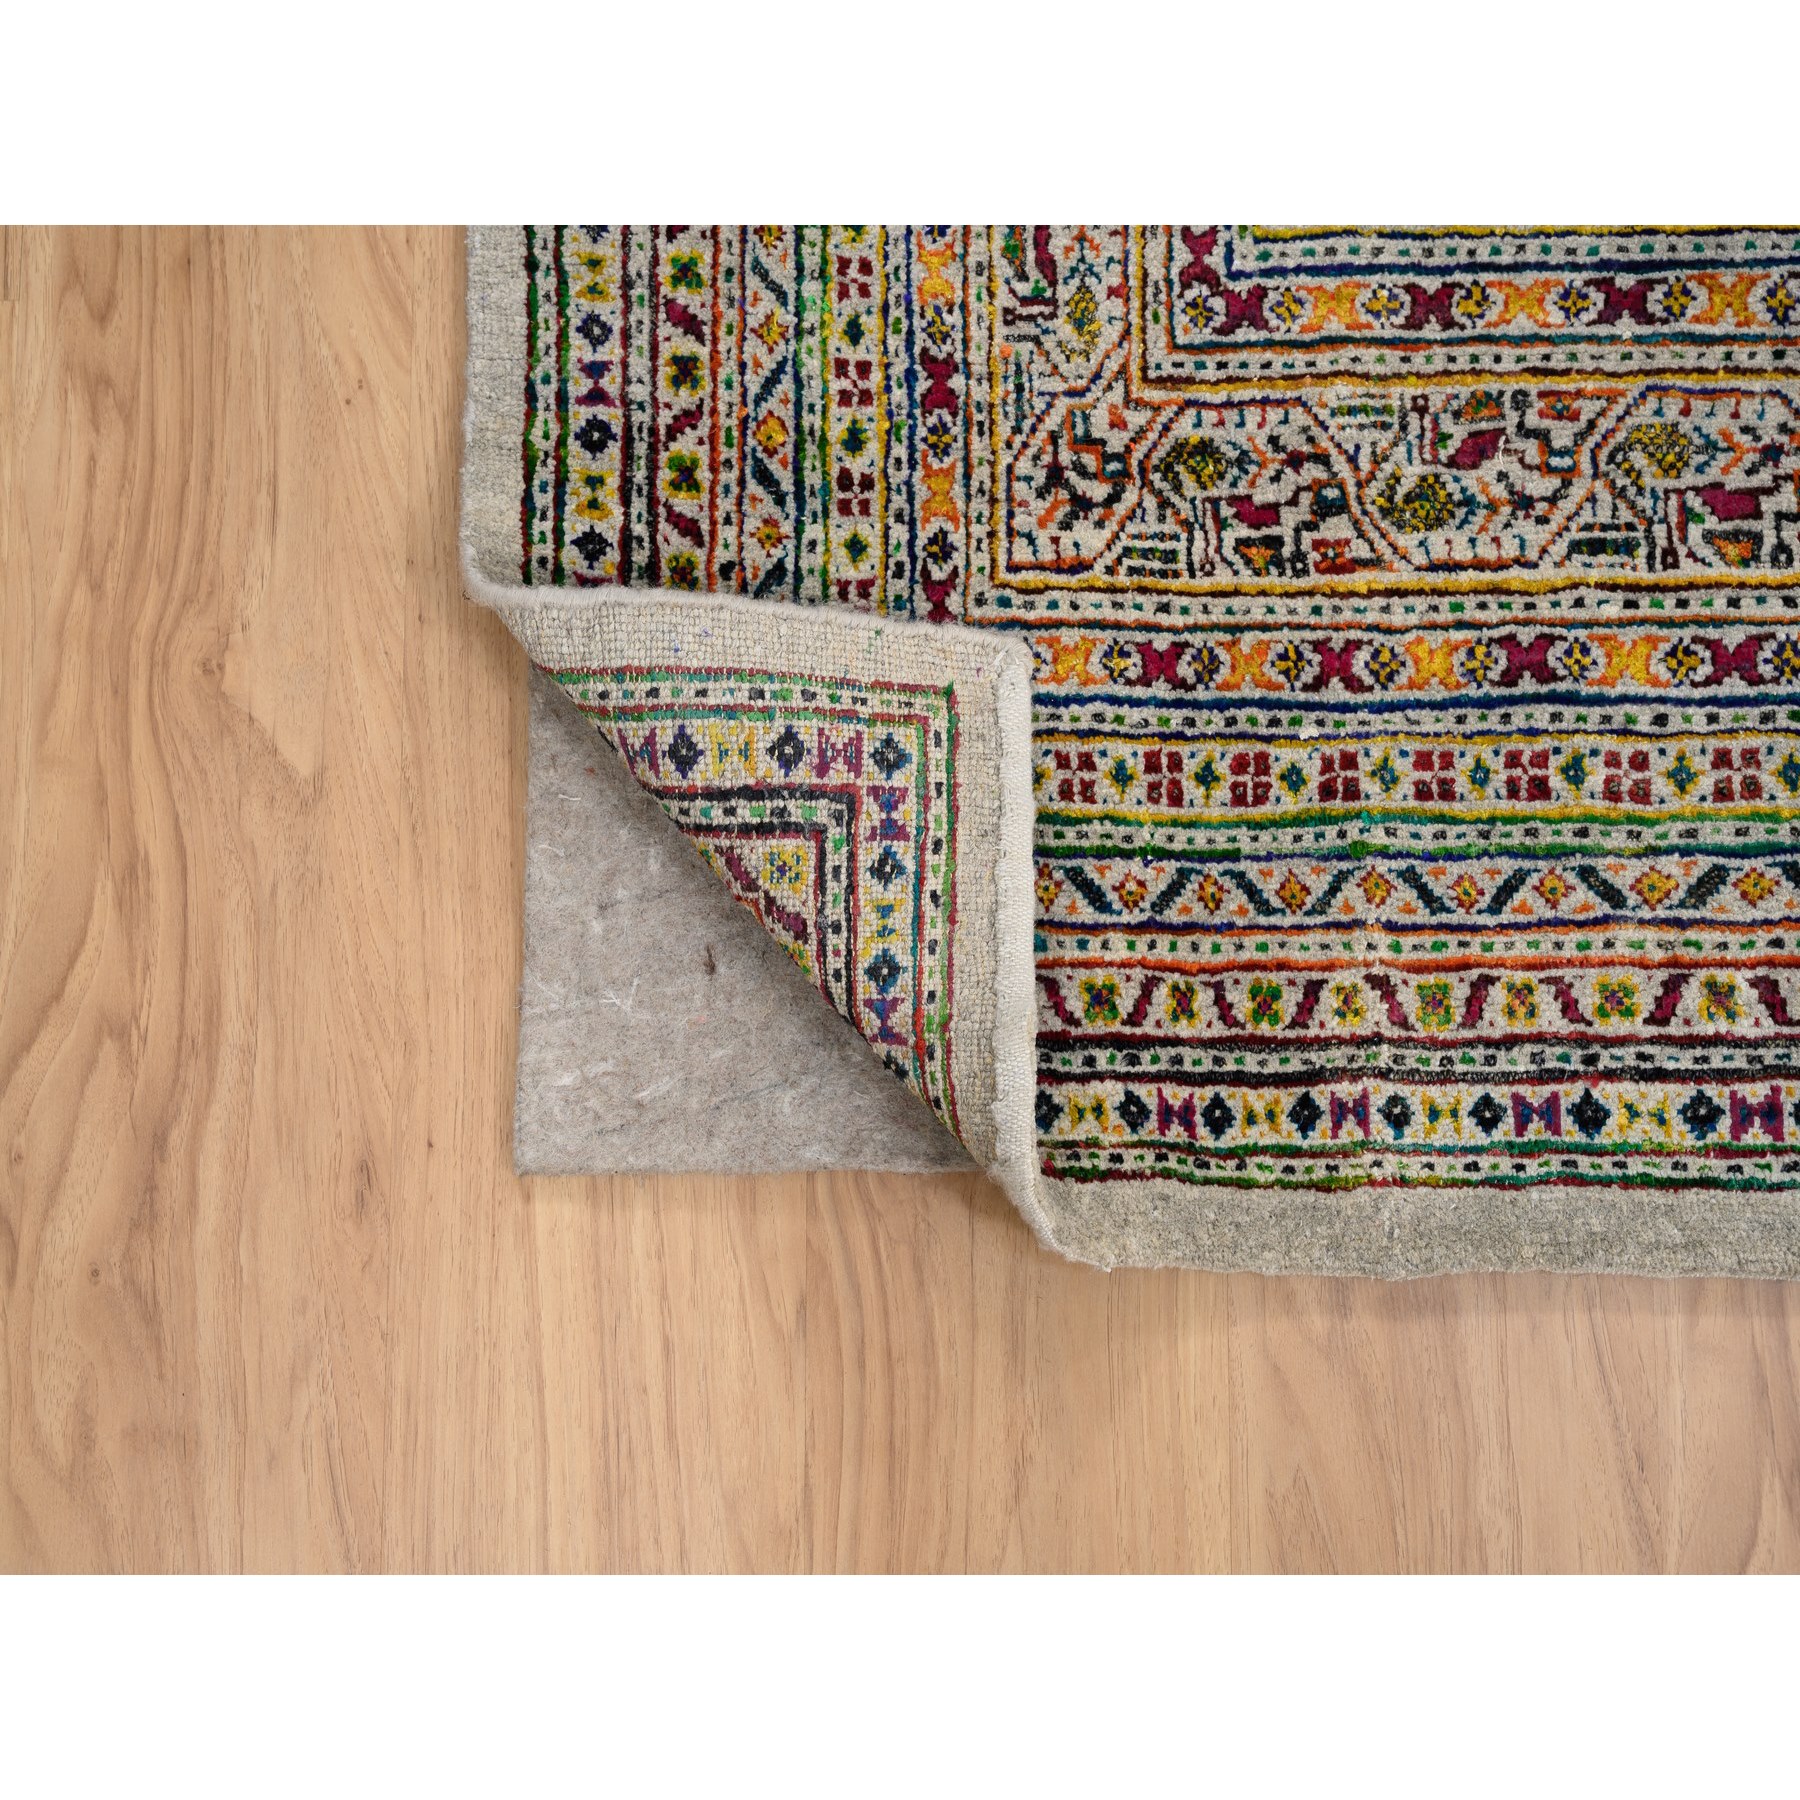 8'8"x12'2" Hand Woven Beige Sarouk Mir Inspired With Repetitive Boteh Design Colorful Wool And Sari Silk Oriental Rug 